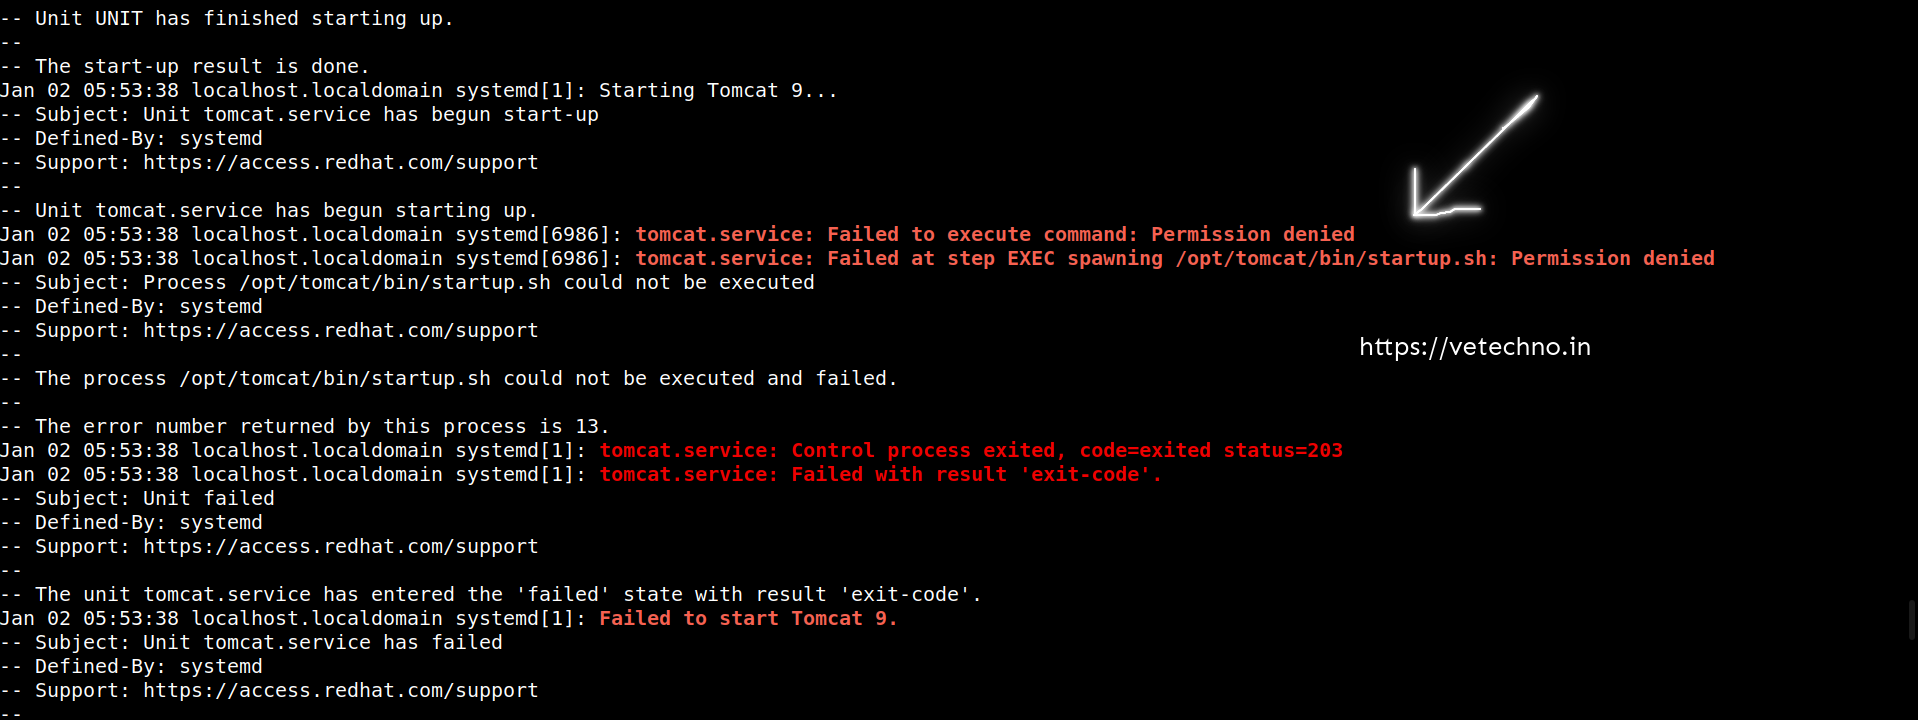 tomcat.service: Failed at step EXEC spawning /opt/tomcat/bin/startup.sh: Permission denied